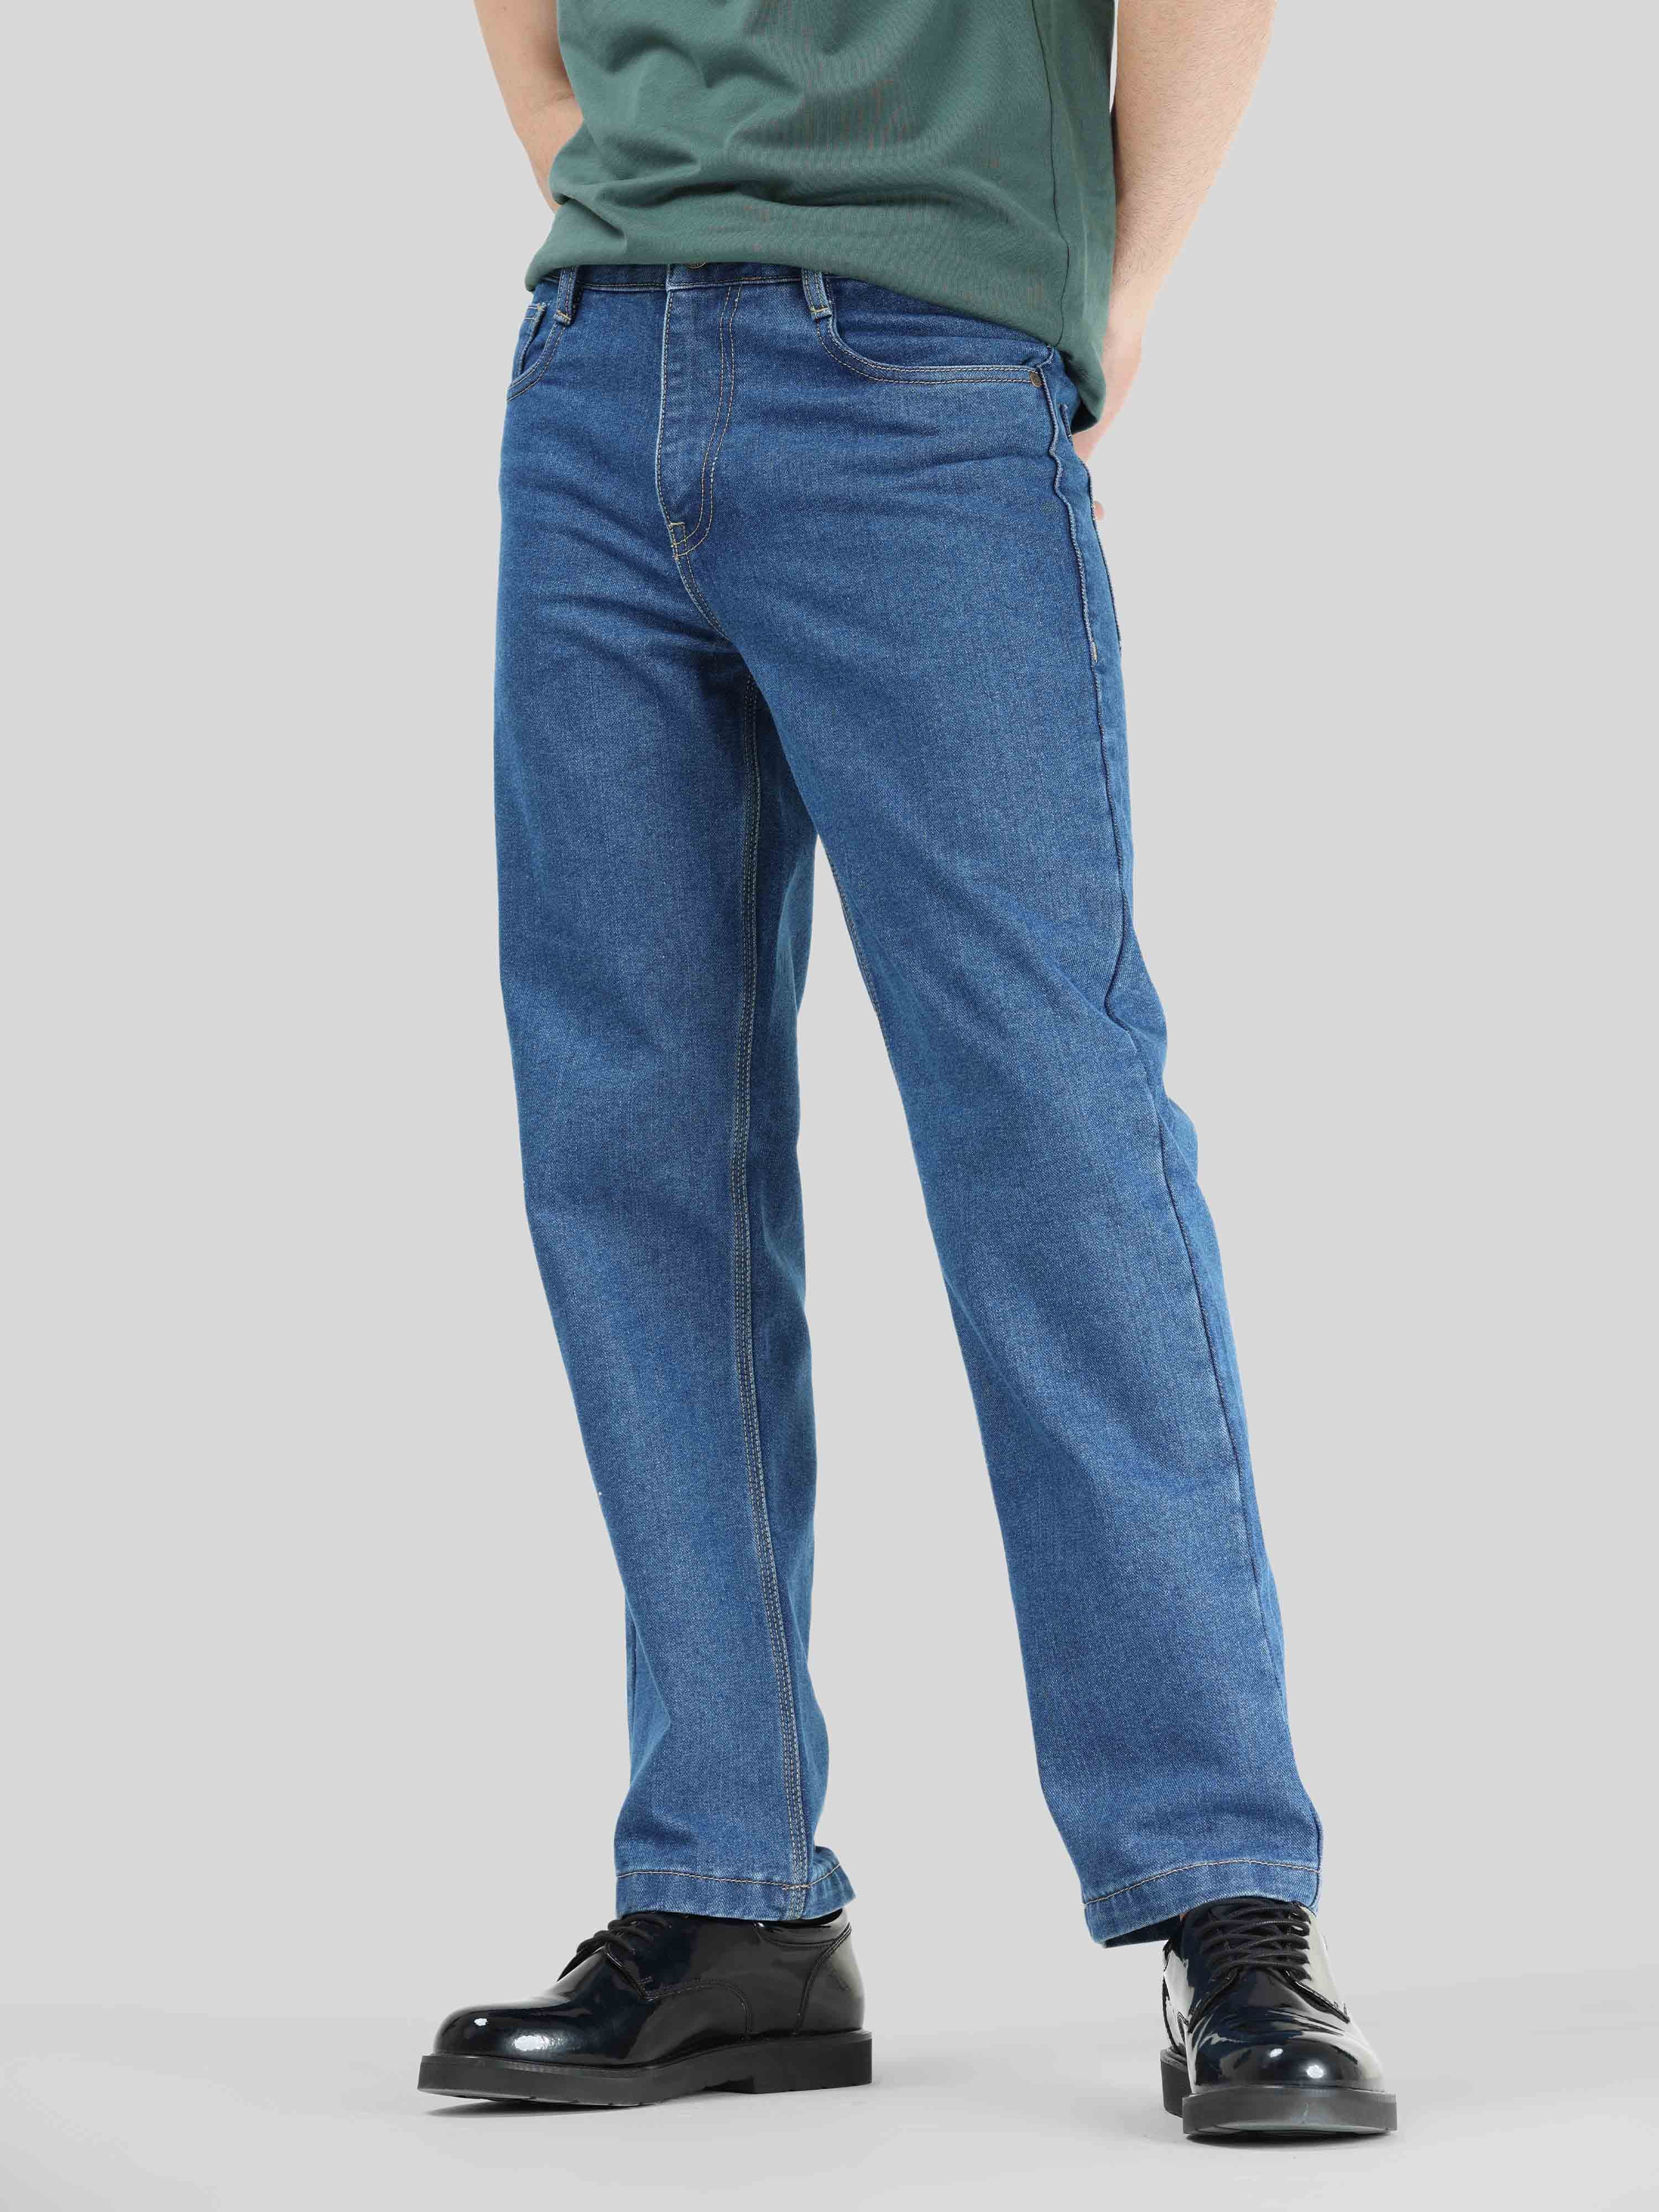 Men's Double L Jeans, Relaxed Fit, Flannel-Lined | Jeans at L.L.Bean